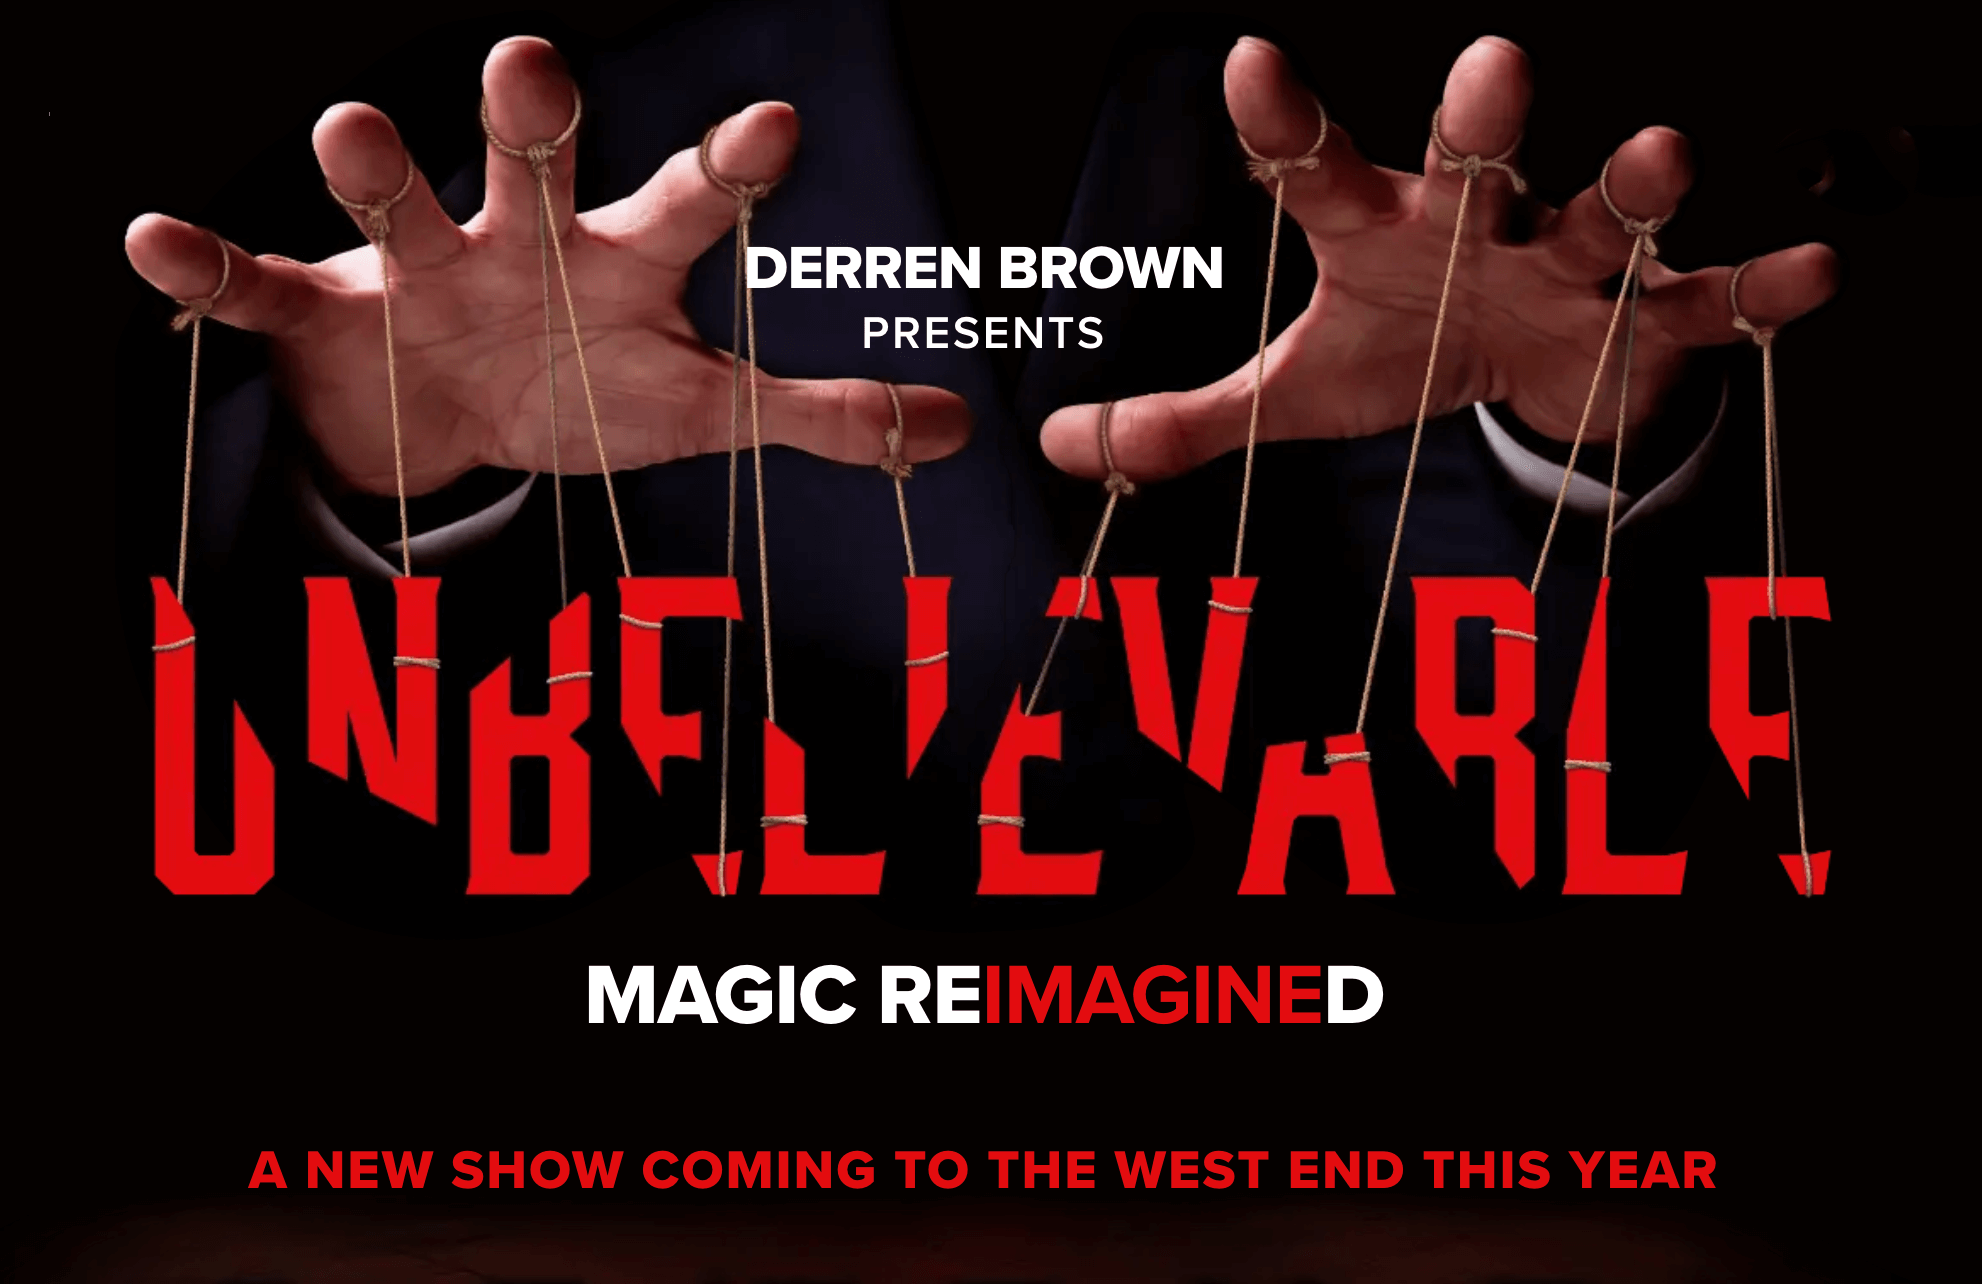 Derren Brown's New Live Show is Missing Something: Full Story